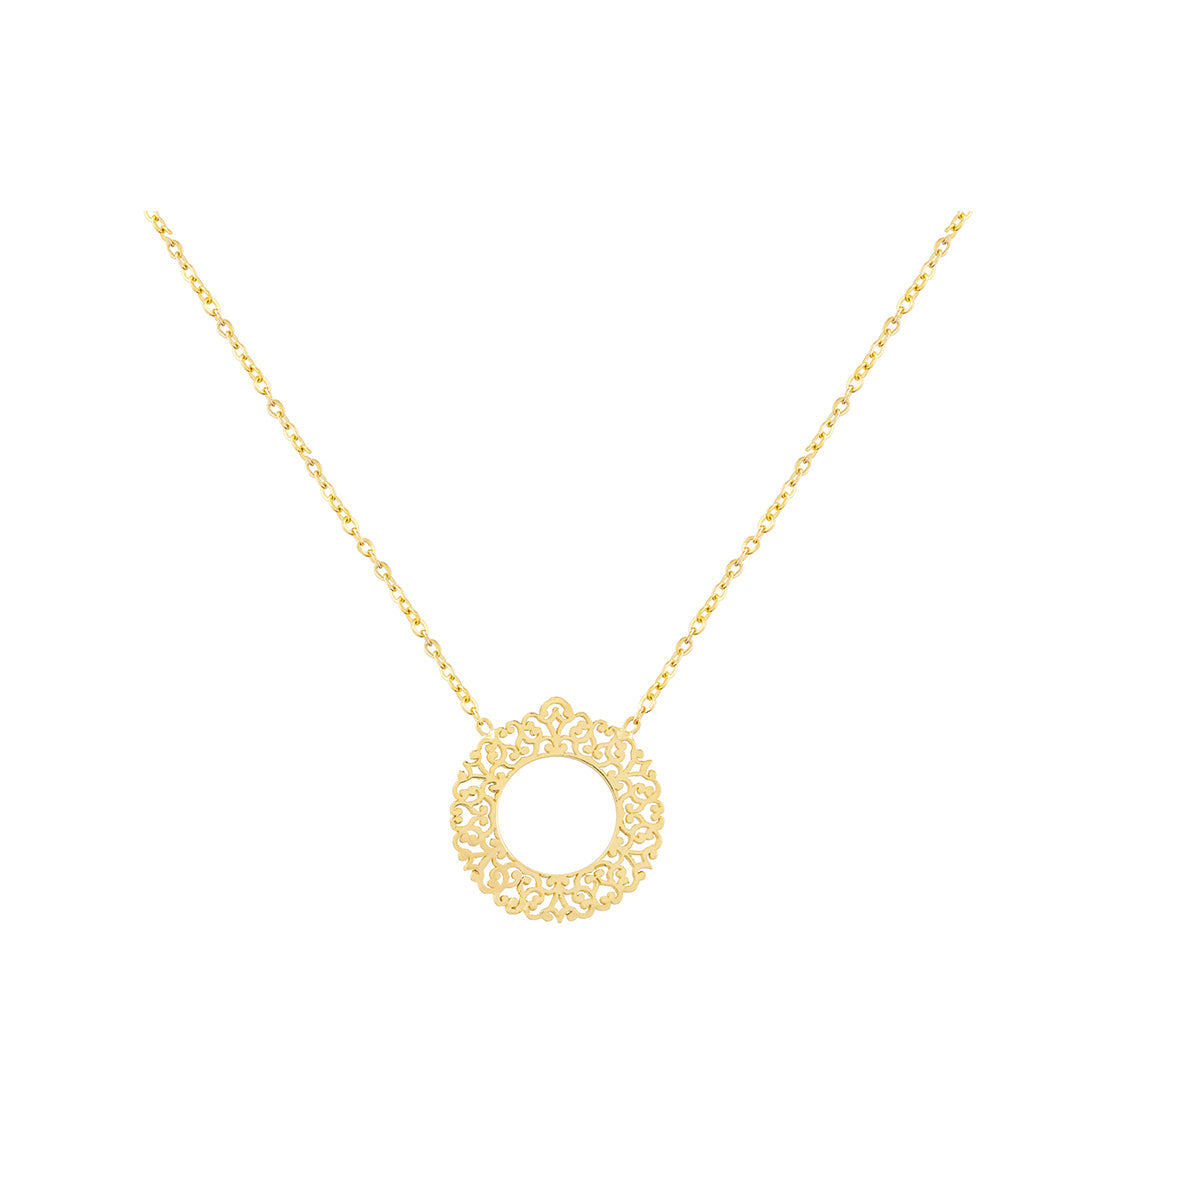 Circle Pendant Necklace in 18K Yellow Gold